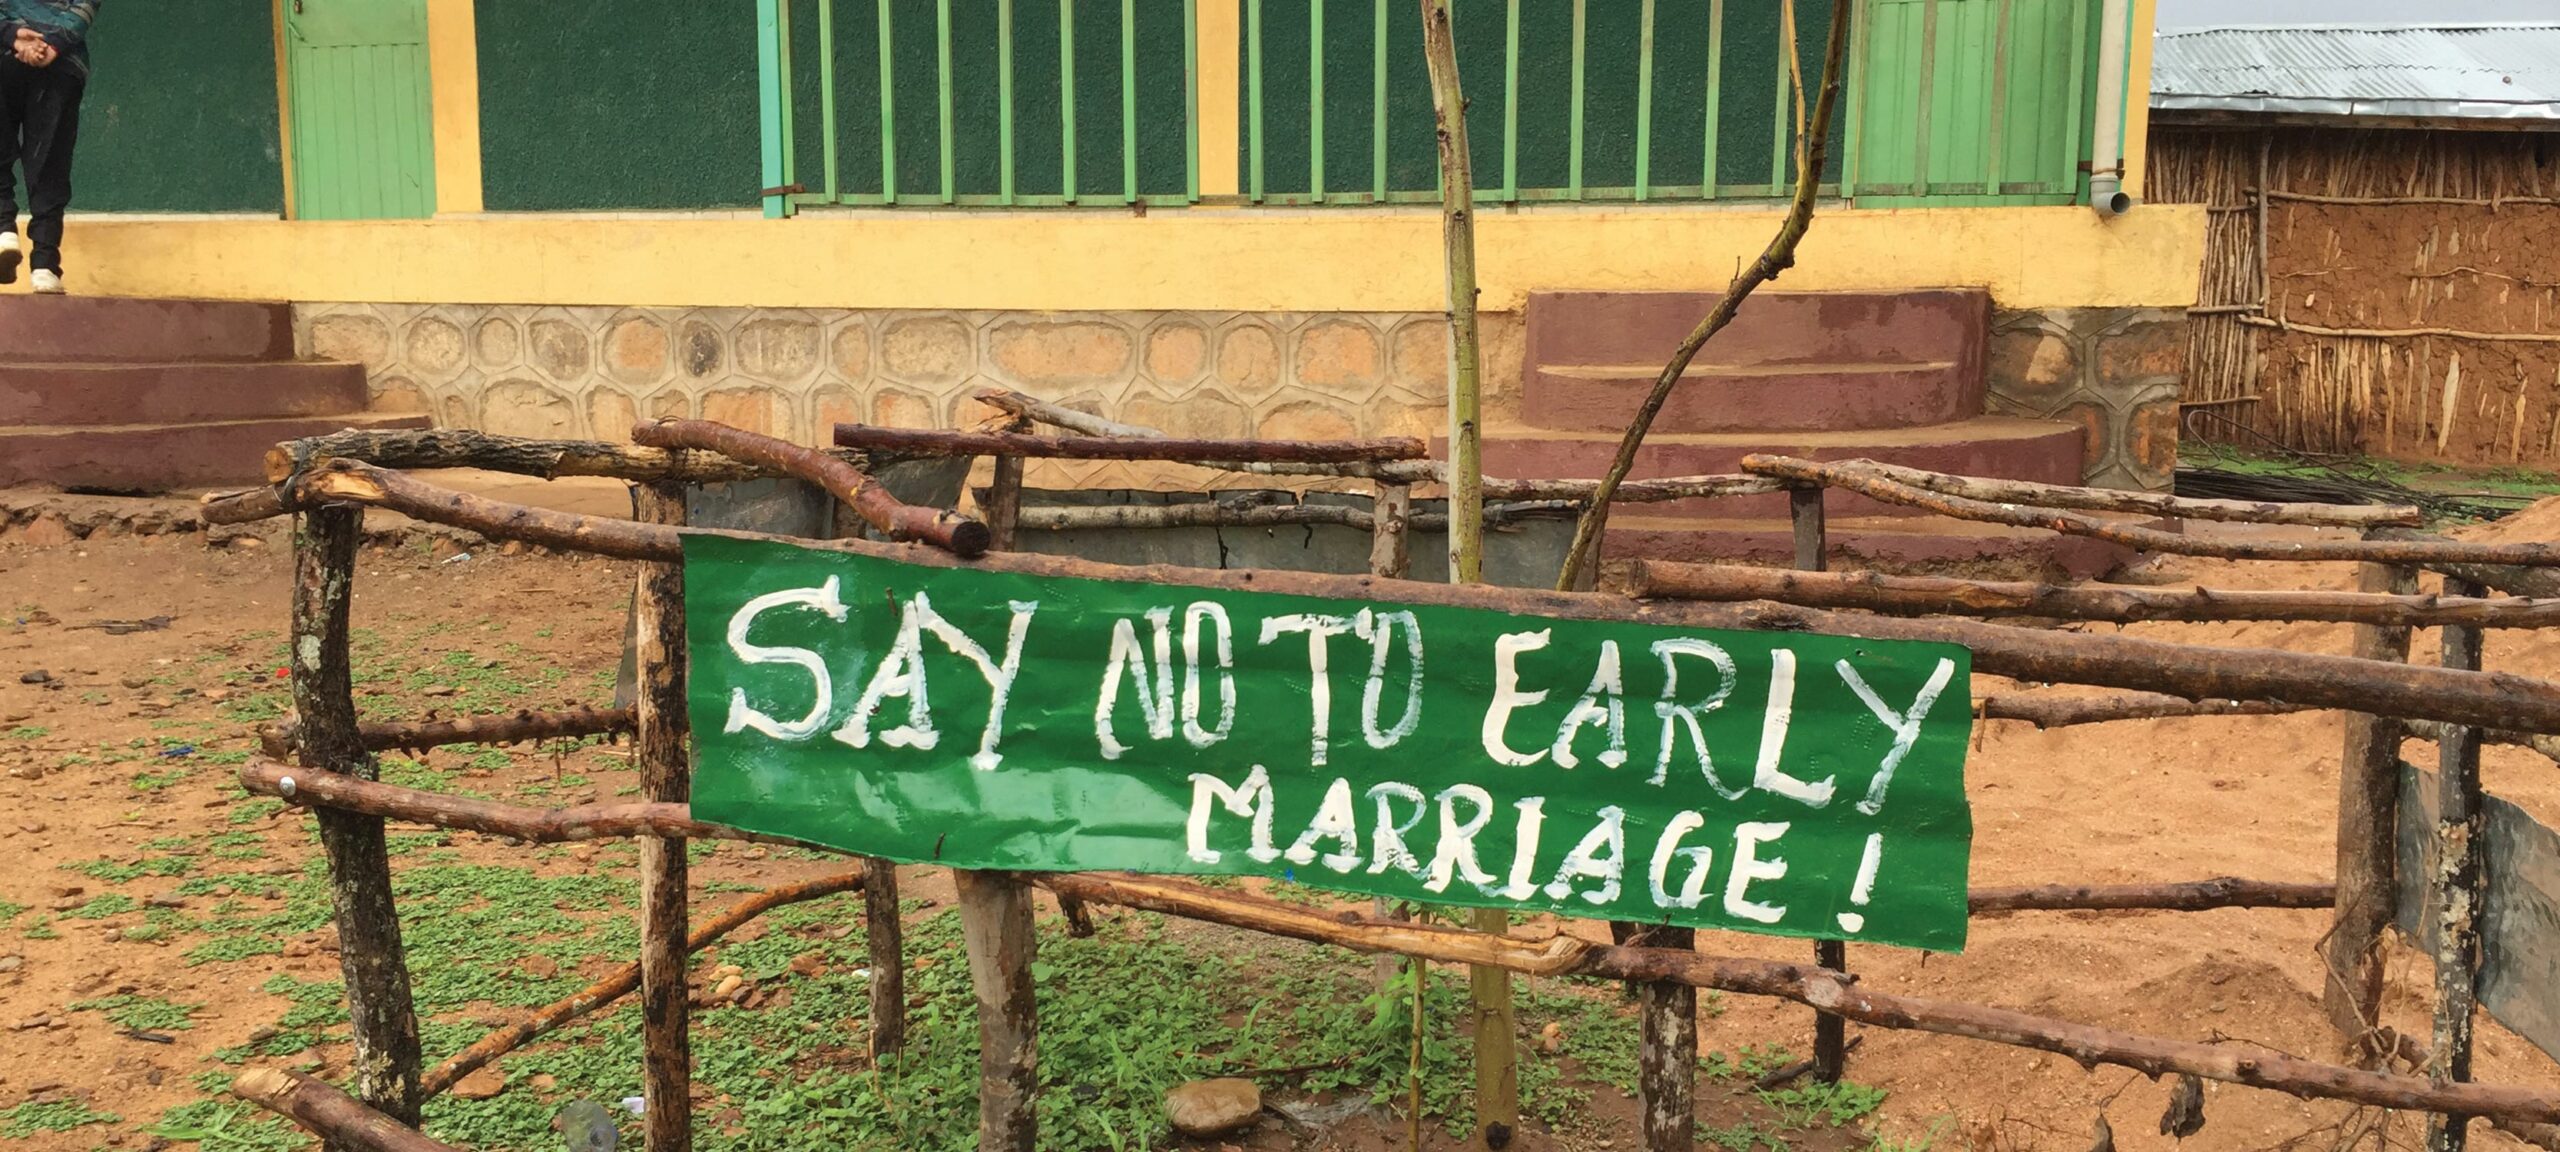 Banner with the sign "Say no to early marriage!"